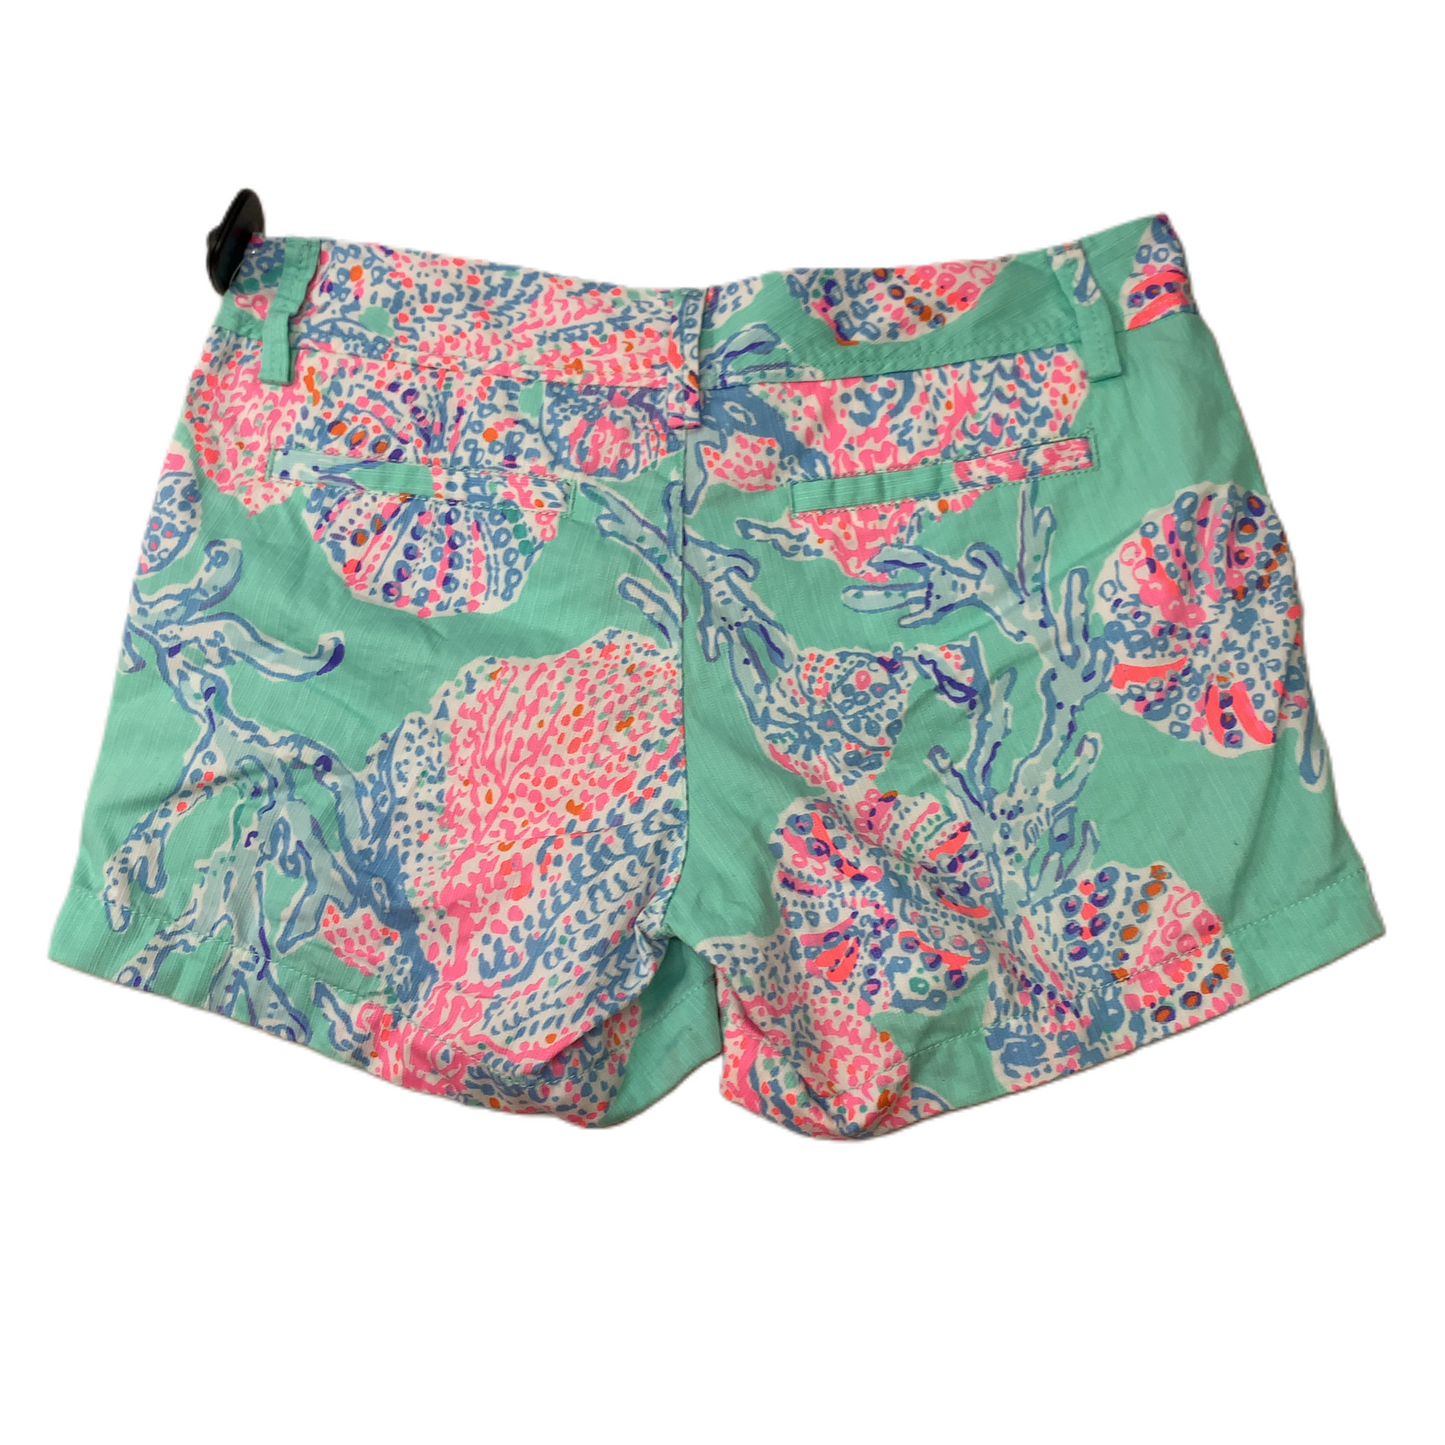 Blue & Pink  Shorts Designer By Lilly Pulitzer  Size: 4